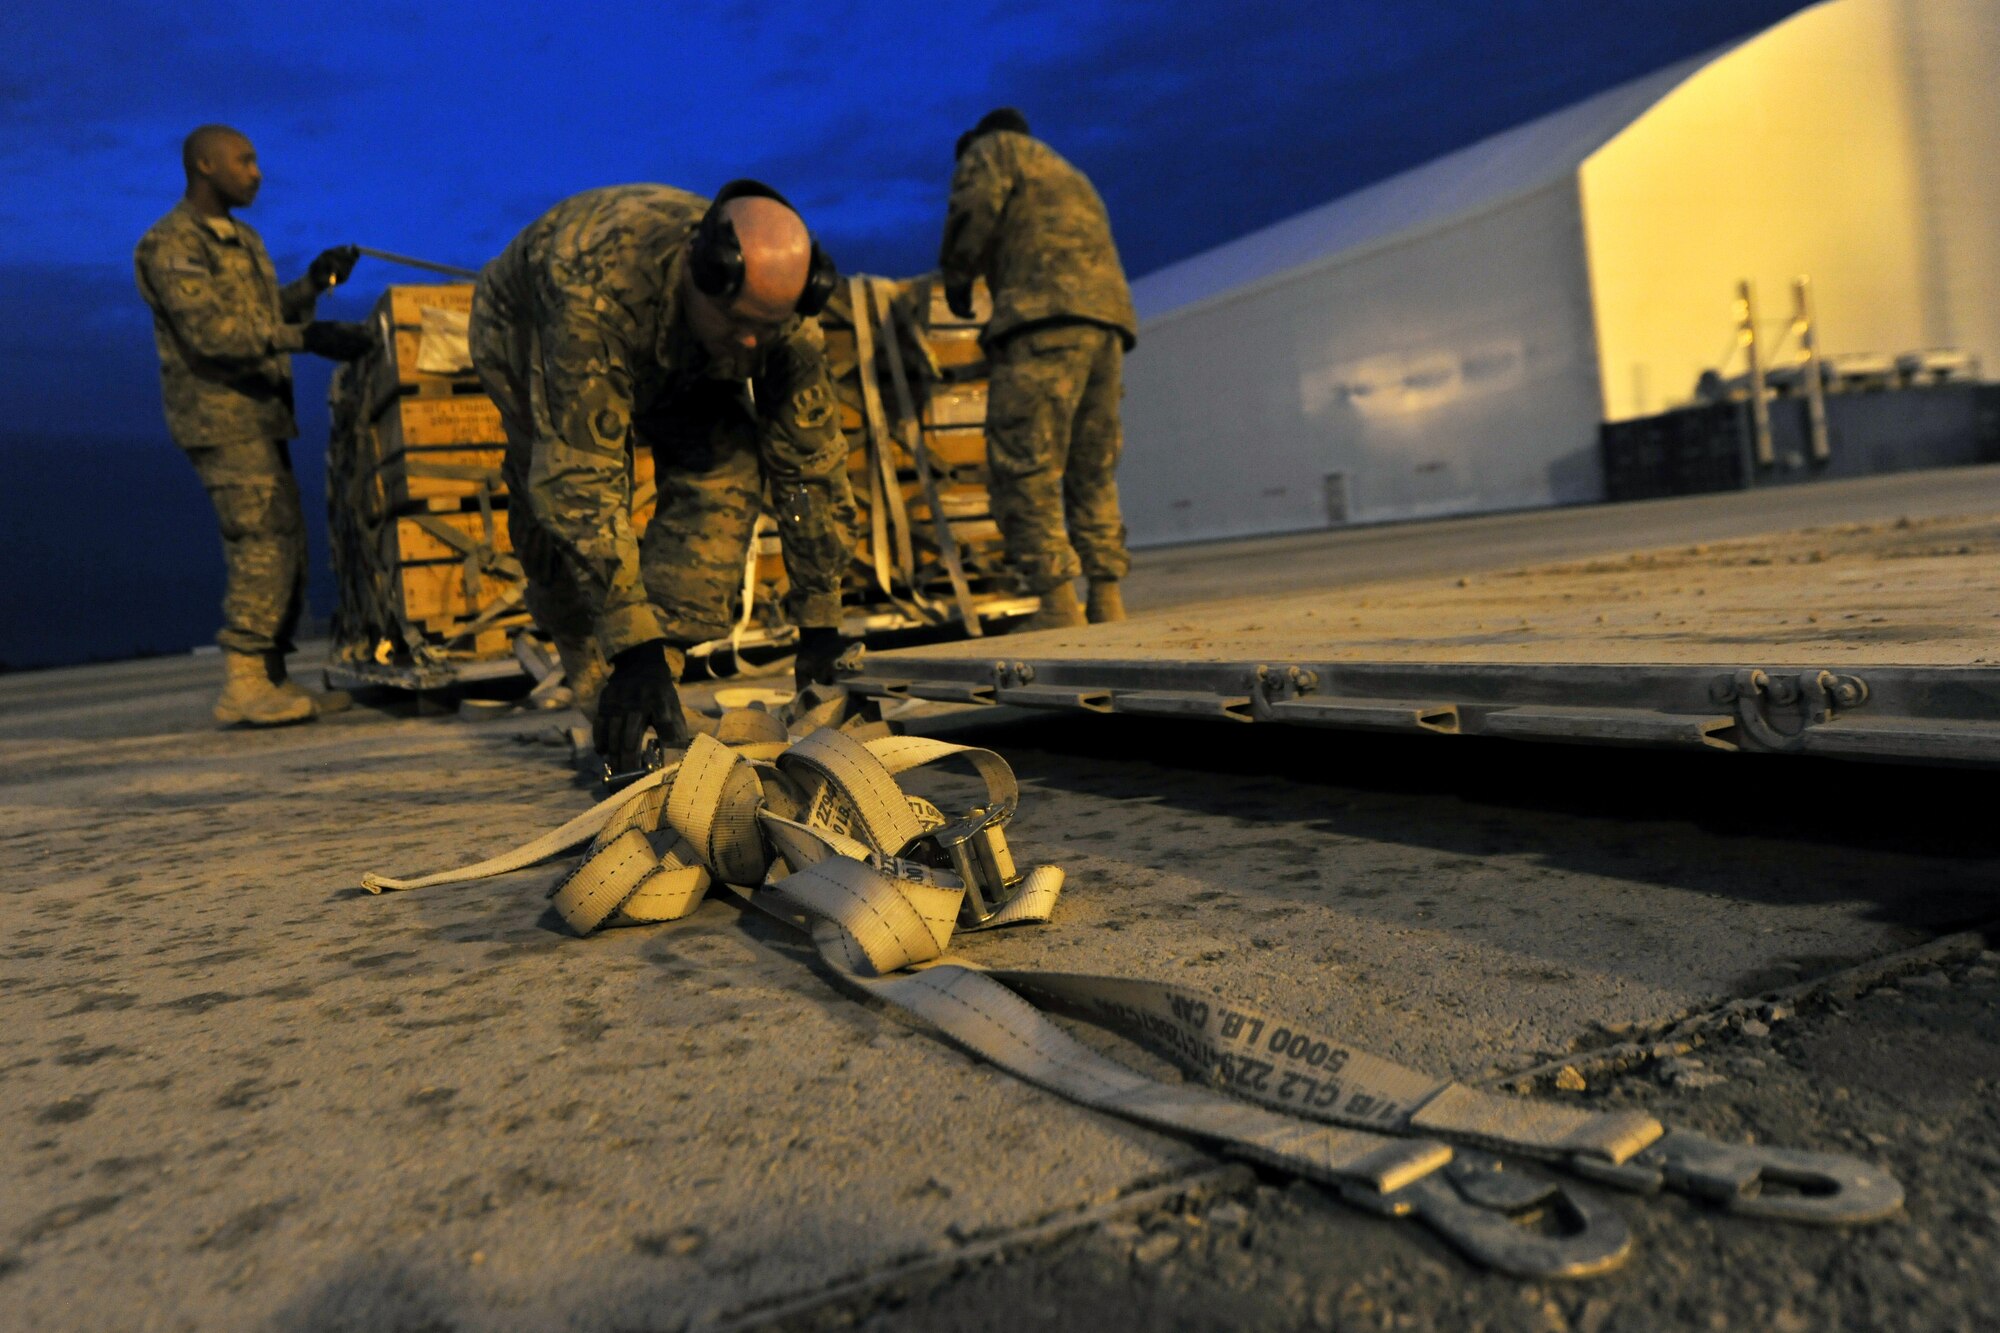 Airmen from 455th Expeditionary Aerial Port Squadron, Detachment 3, build pallets at the contingency cargo staging yard on Camp Marmal, Afghanistan, Jan 30, 2013. Airmen from the 455th EAPS are forward deployed from Bagram Airfield, Afghanistan, to support the main Air Force contingency cargo staging yard in Regional Command-North. (U.S. Air Force photo/Senior Airman Chris Willis)